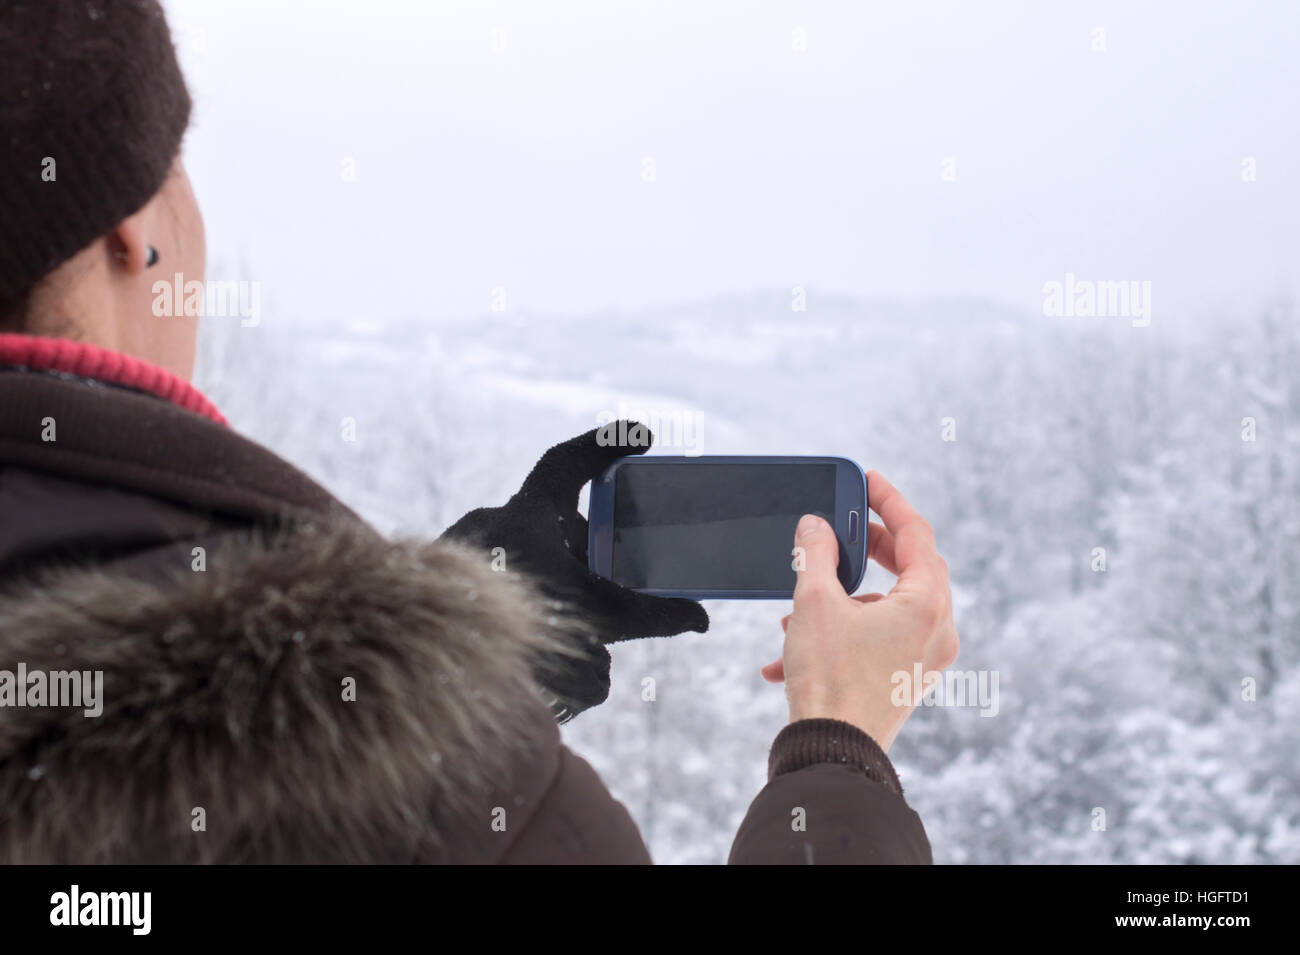 woman taking photo with smartphone in winter. Stock Photo